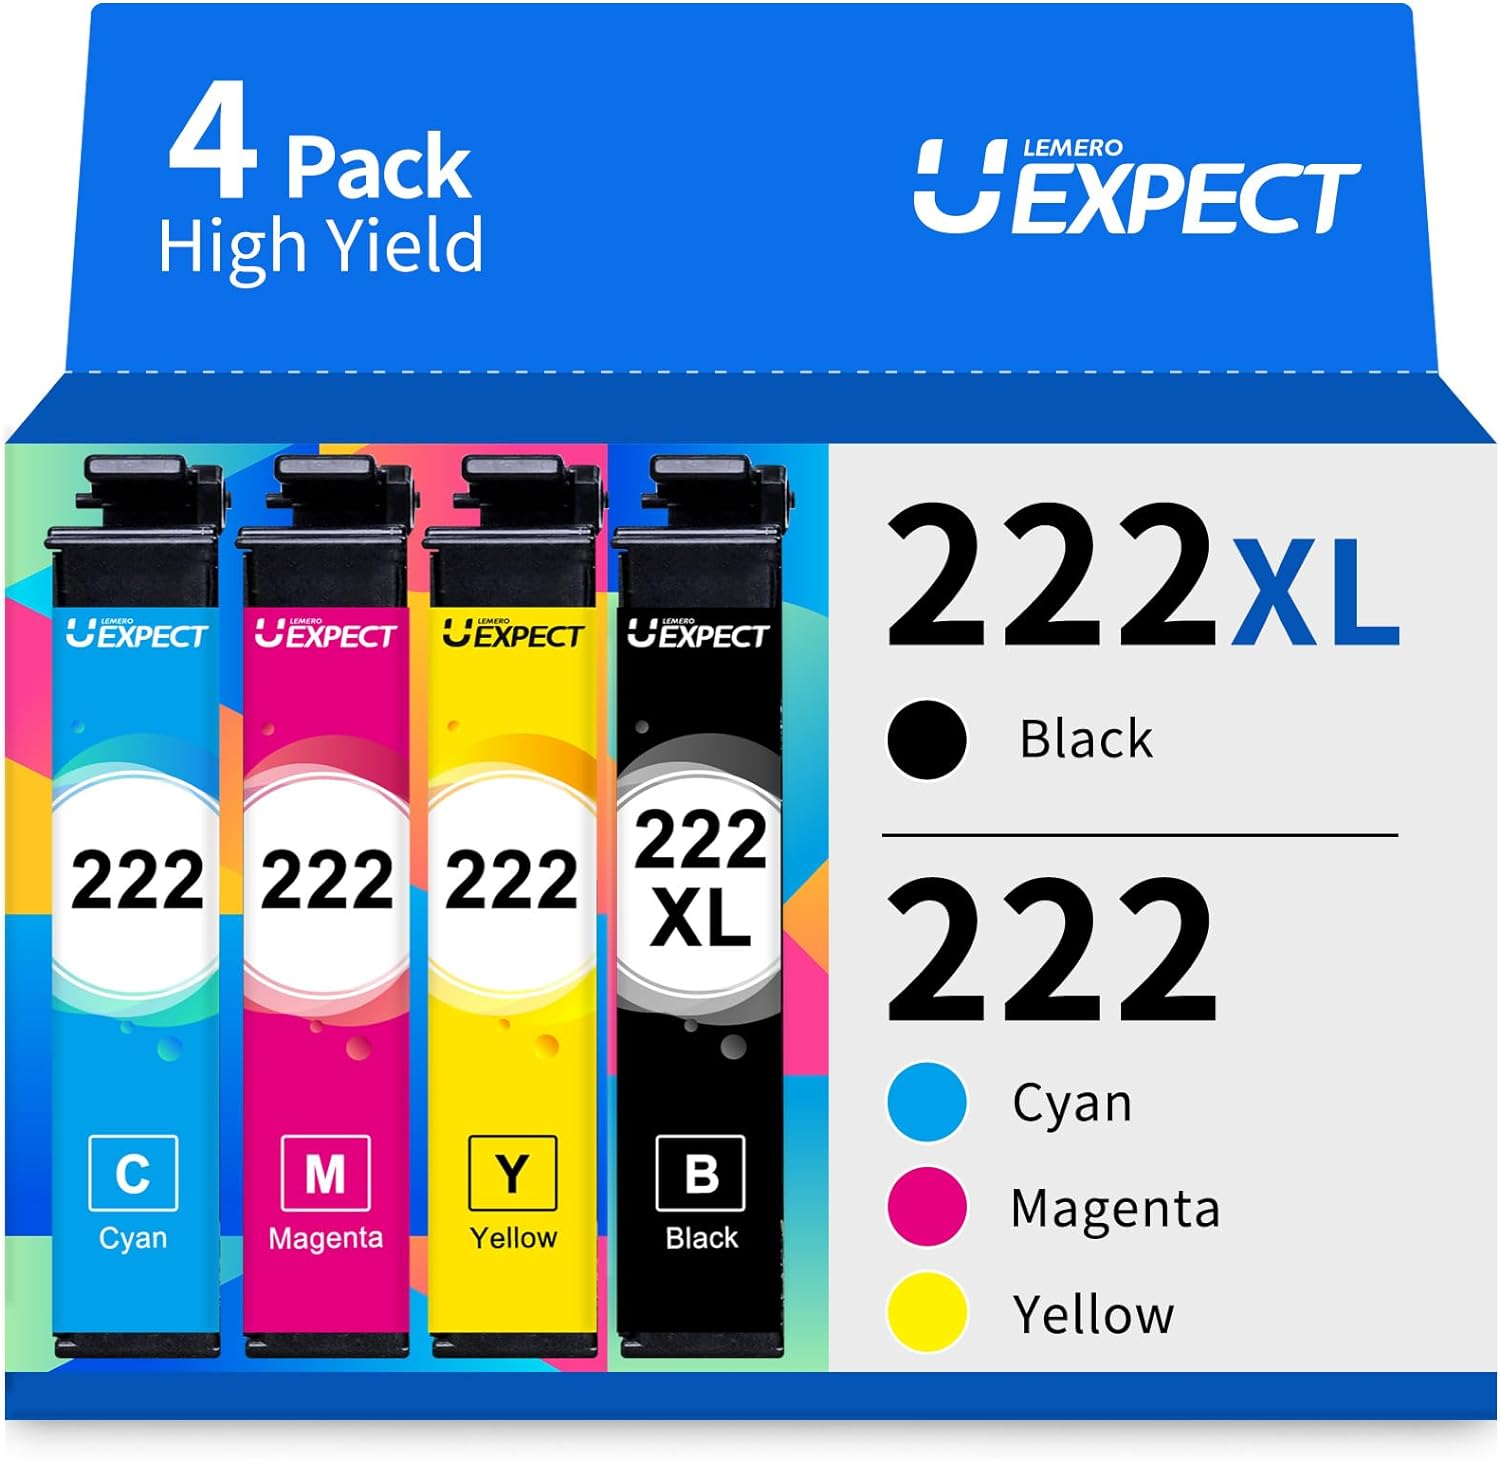 LEMERO UEXPECT Replacement Epson 222XL Ink Cartridges Combo Pack (Black/Cyan/Magenta/Yellow) 4 Pack Ink 222